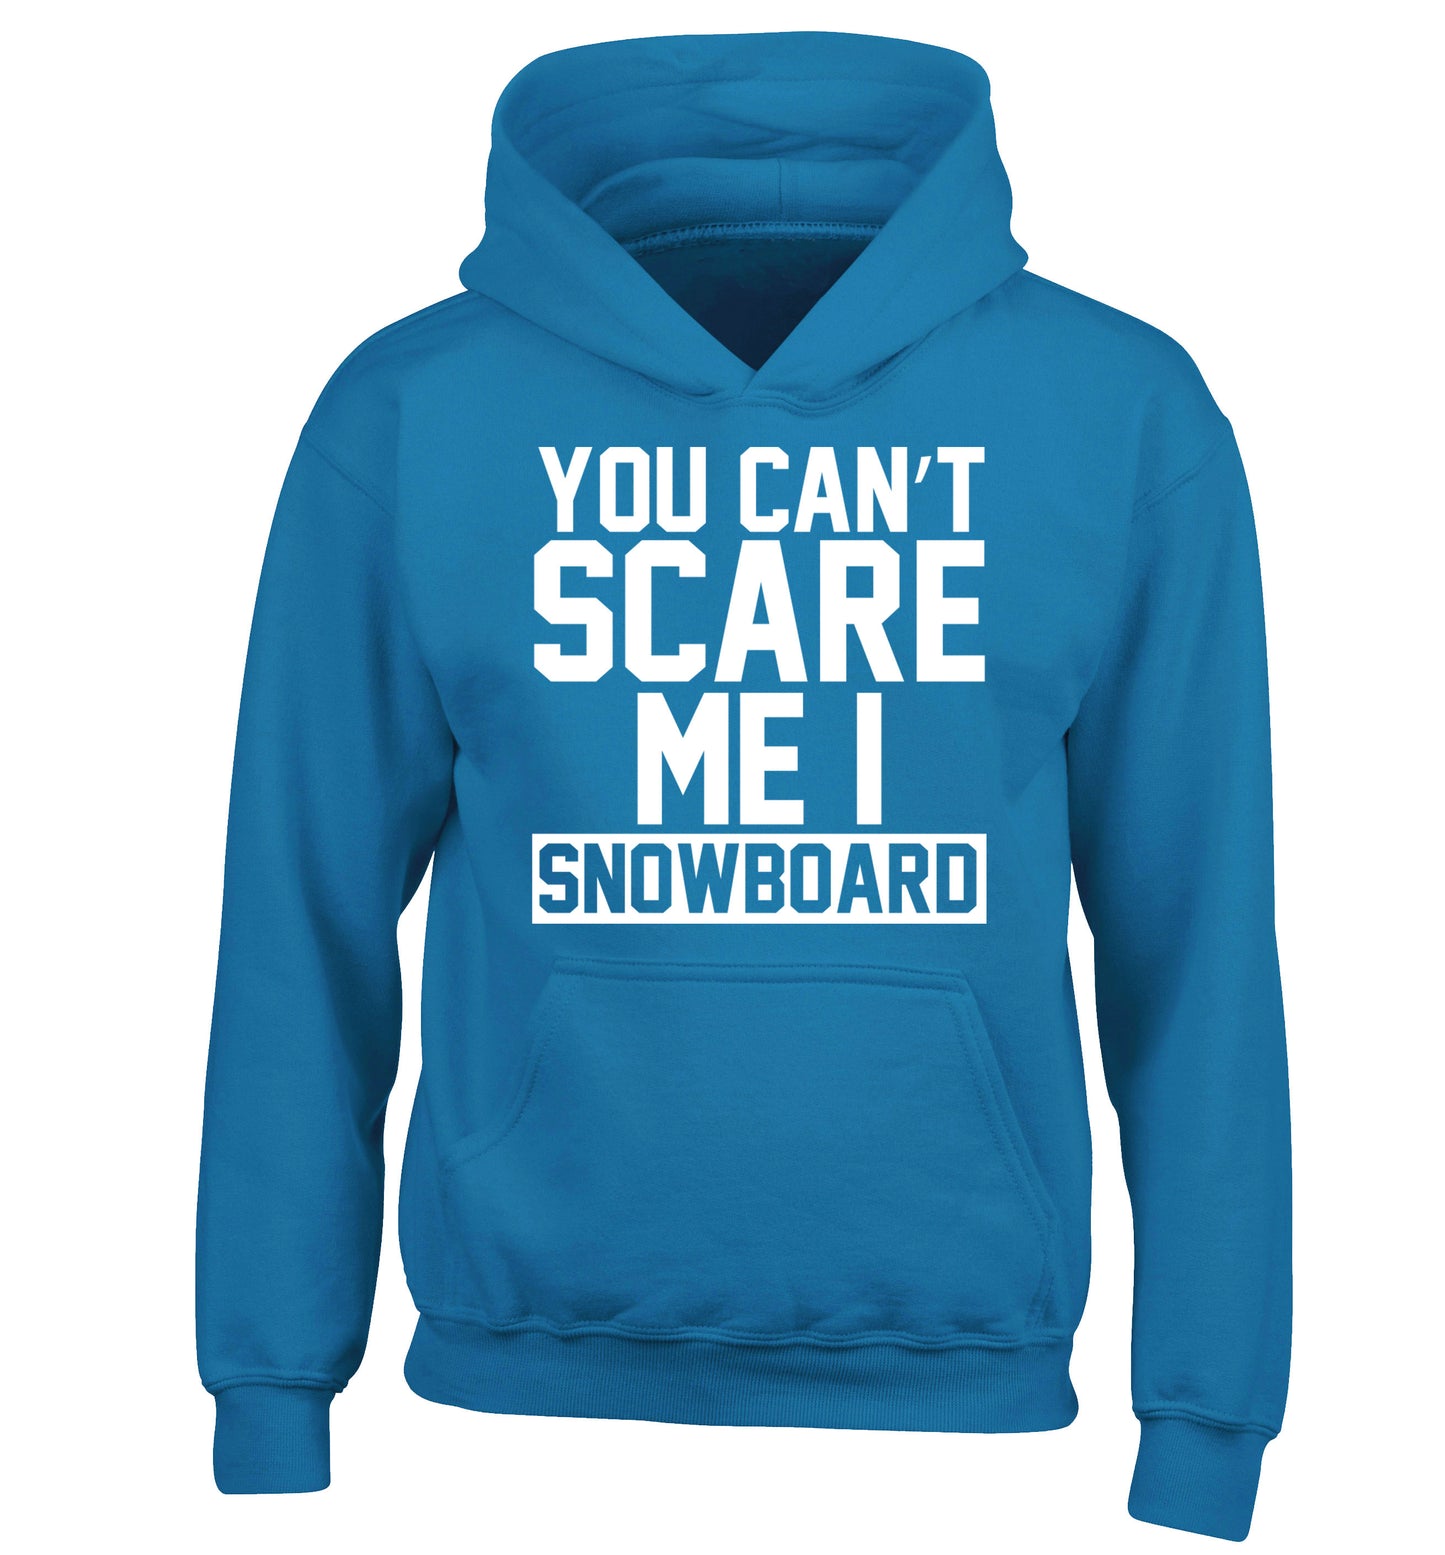 You can't scare me I snowboard children's blue hoodie 12-14 Years